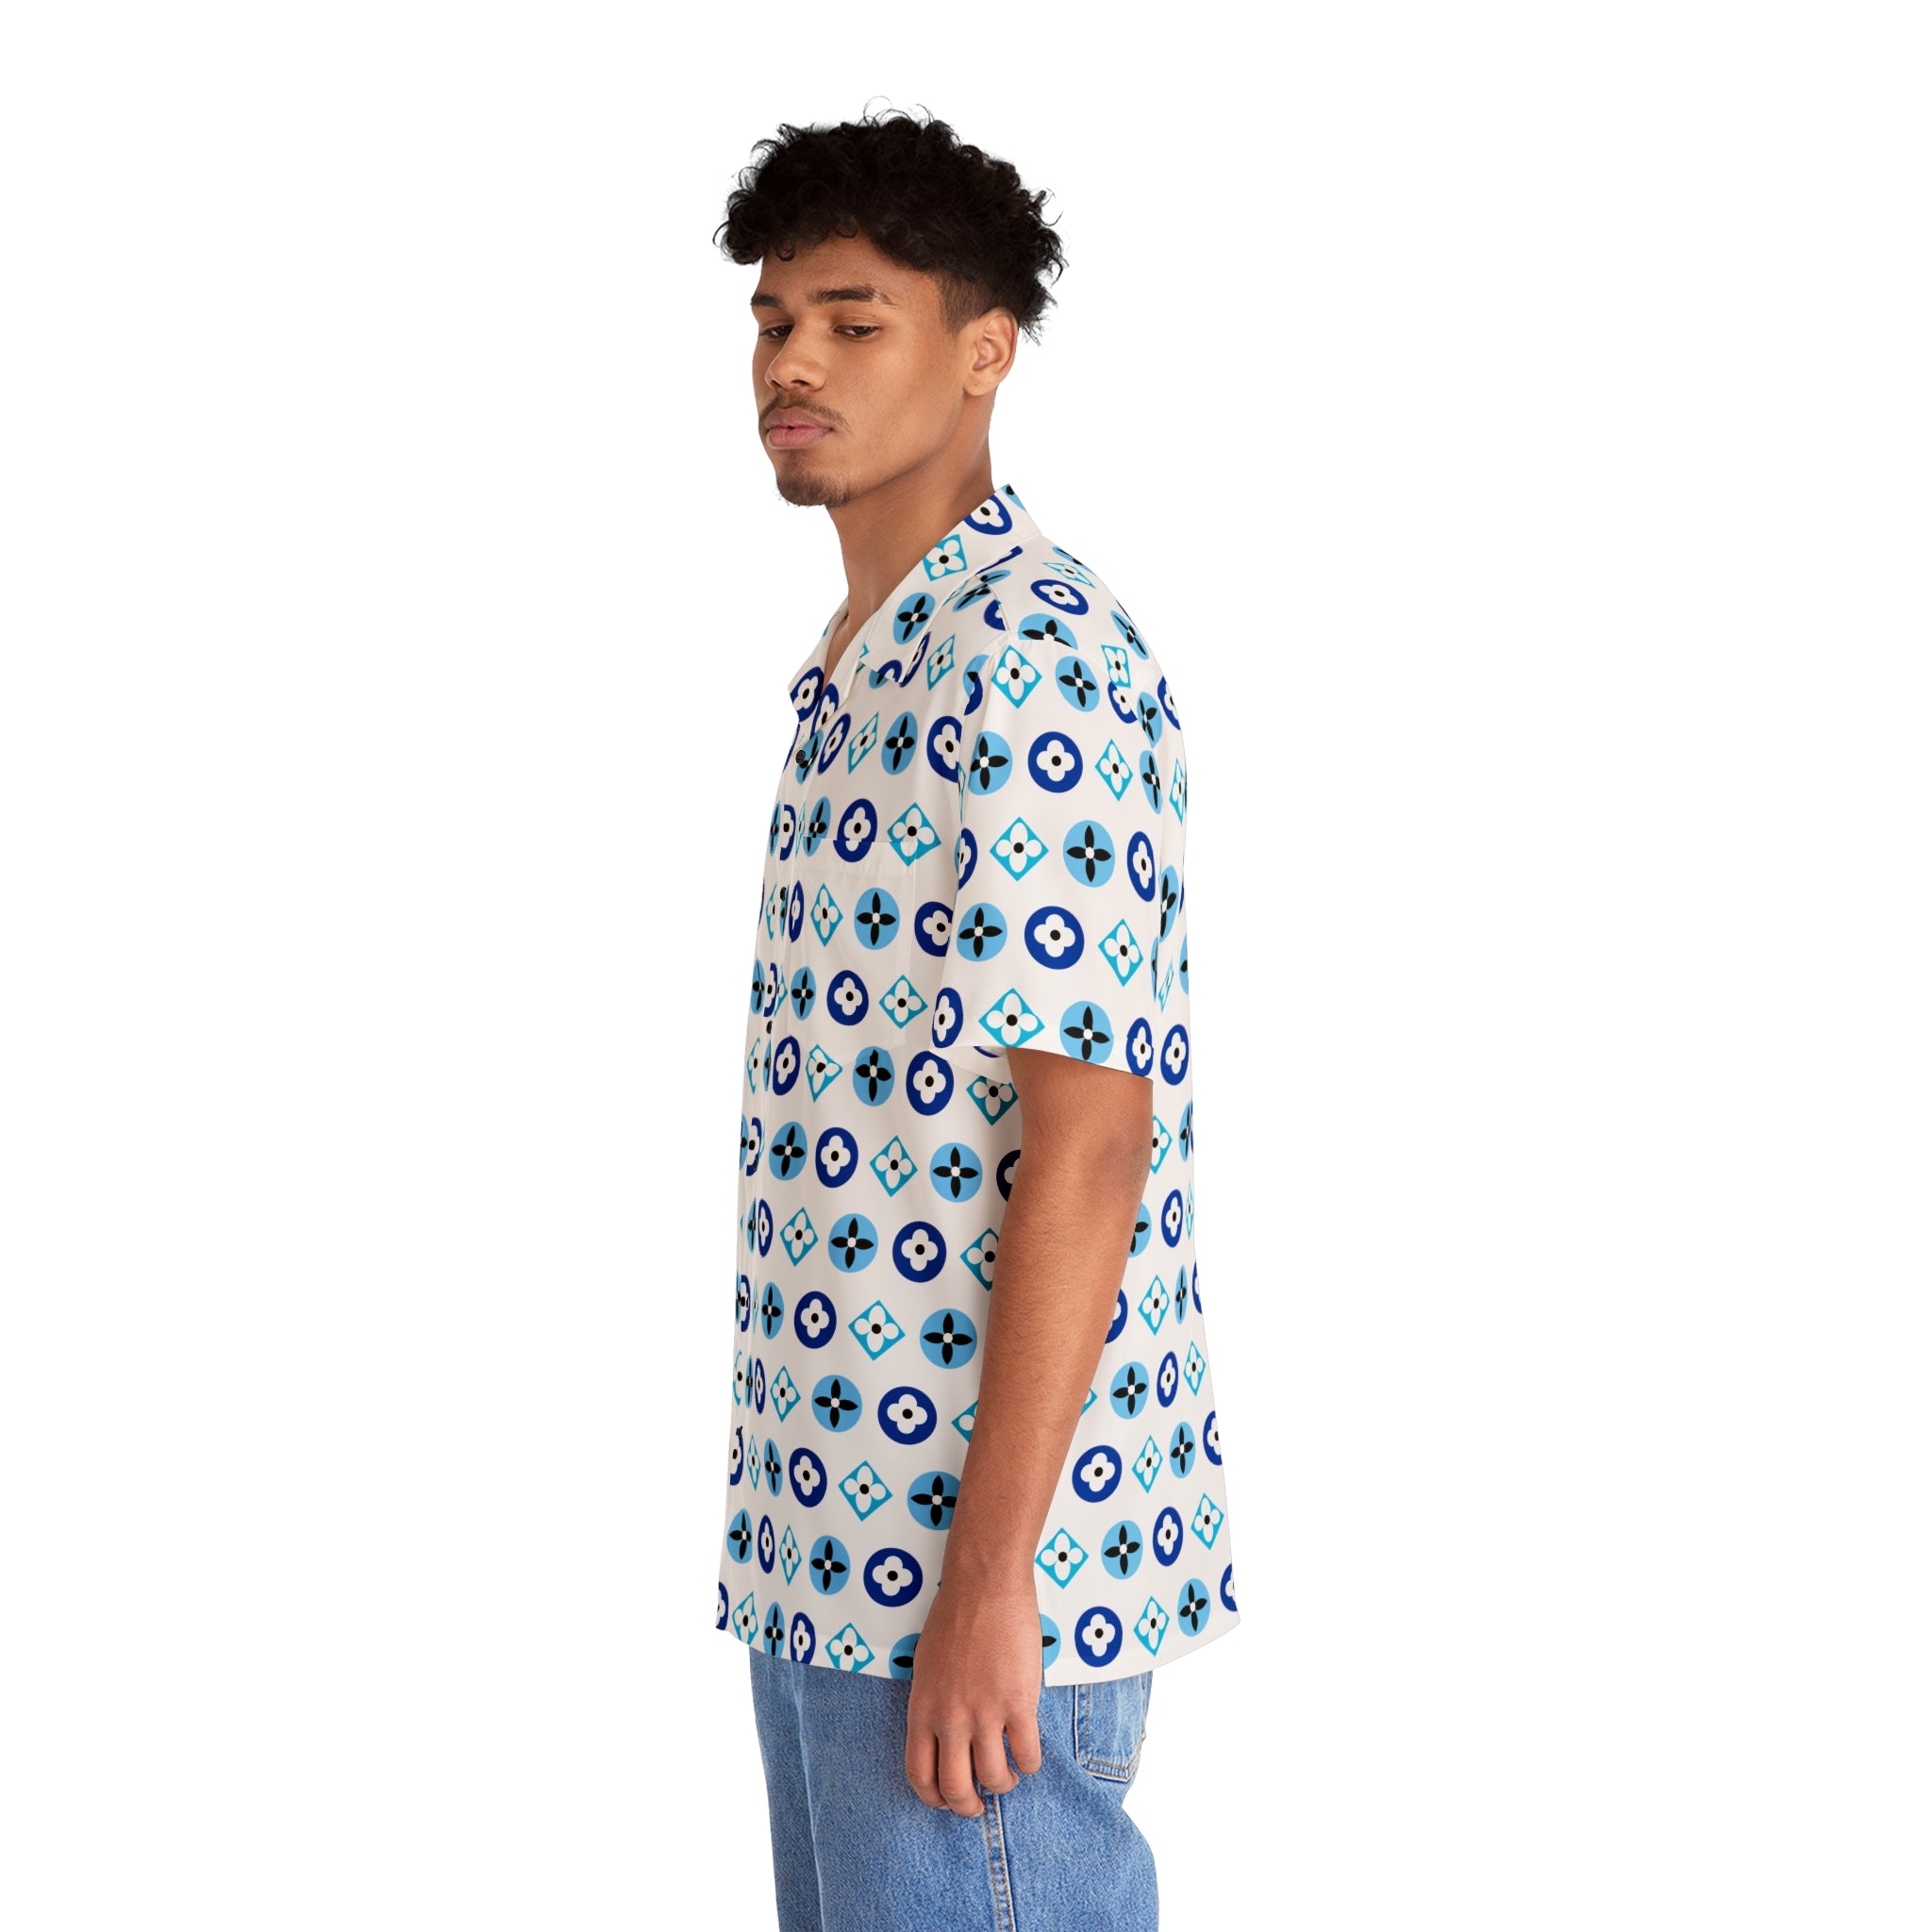  Groove Collection Trilogy of Icons Pattern (Blues) Unisex Gender Neutral White Button Up Shirt, Hawaiian Shirt Men's Shirts